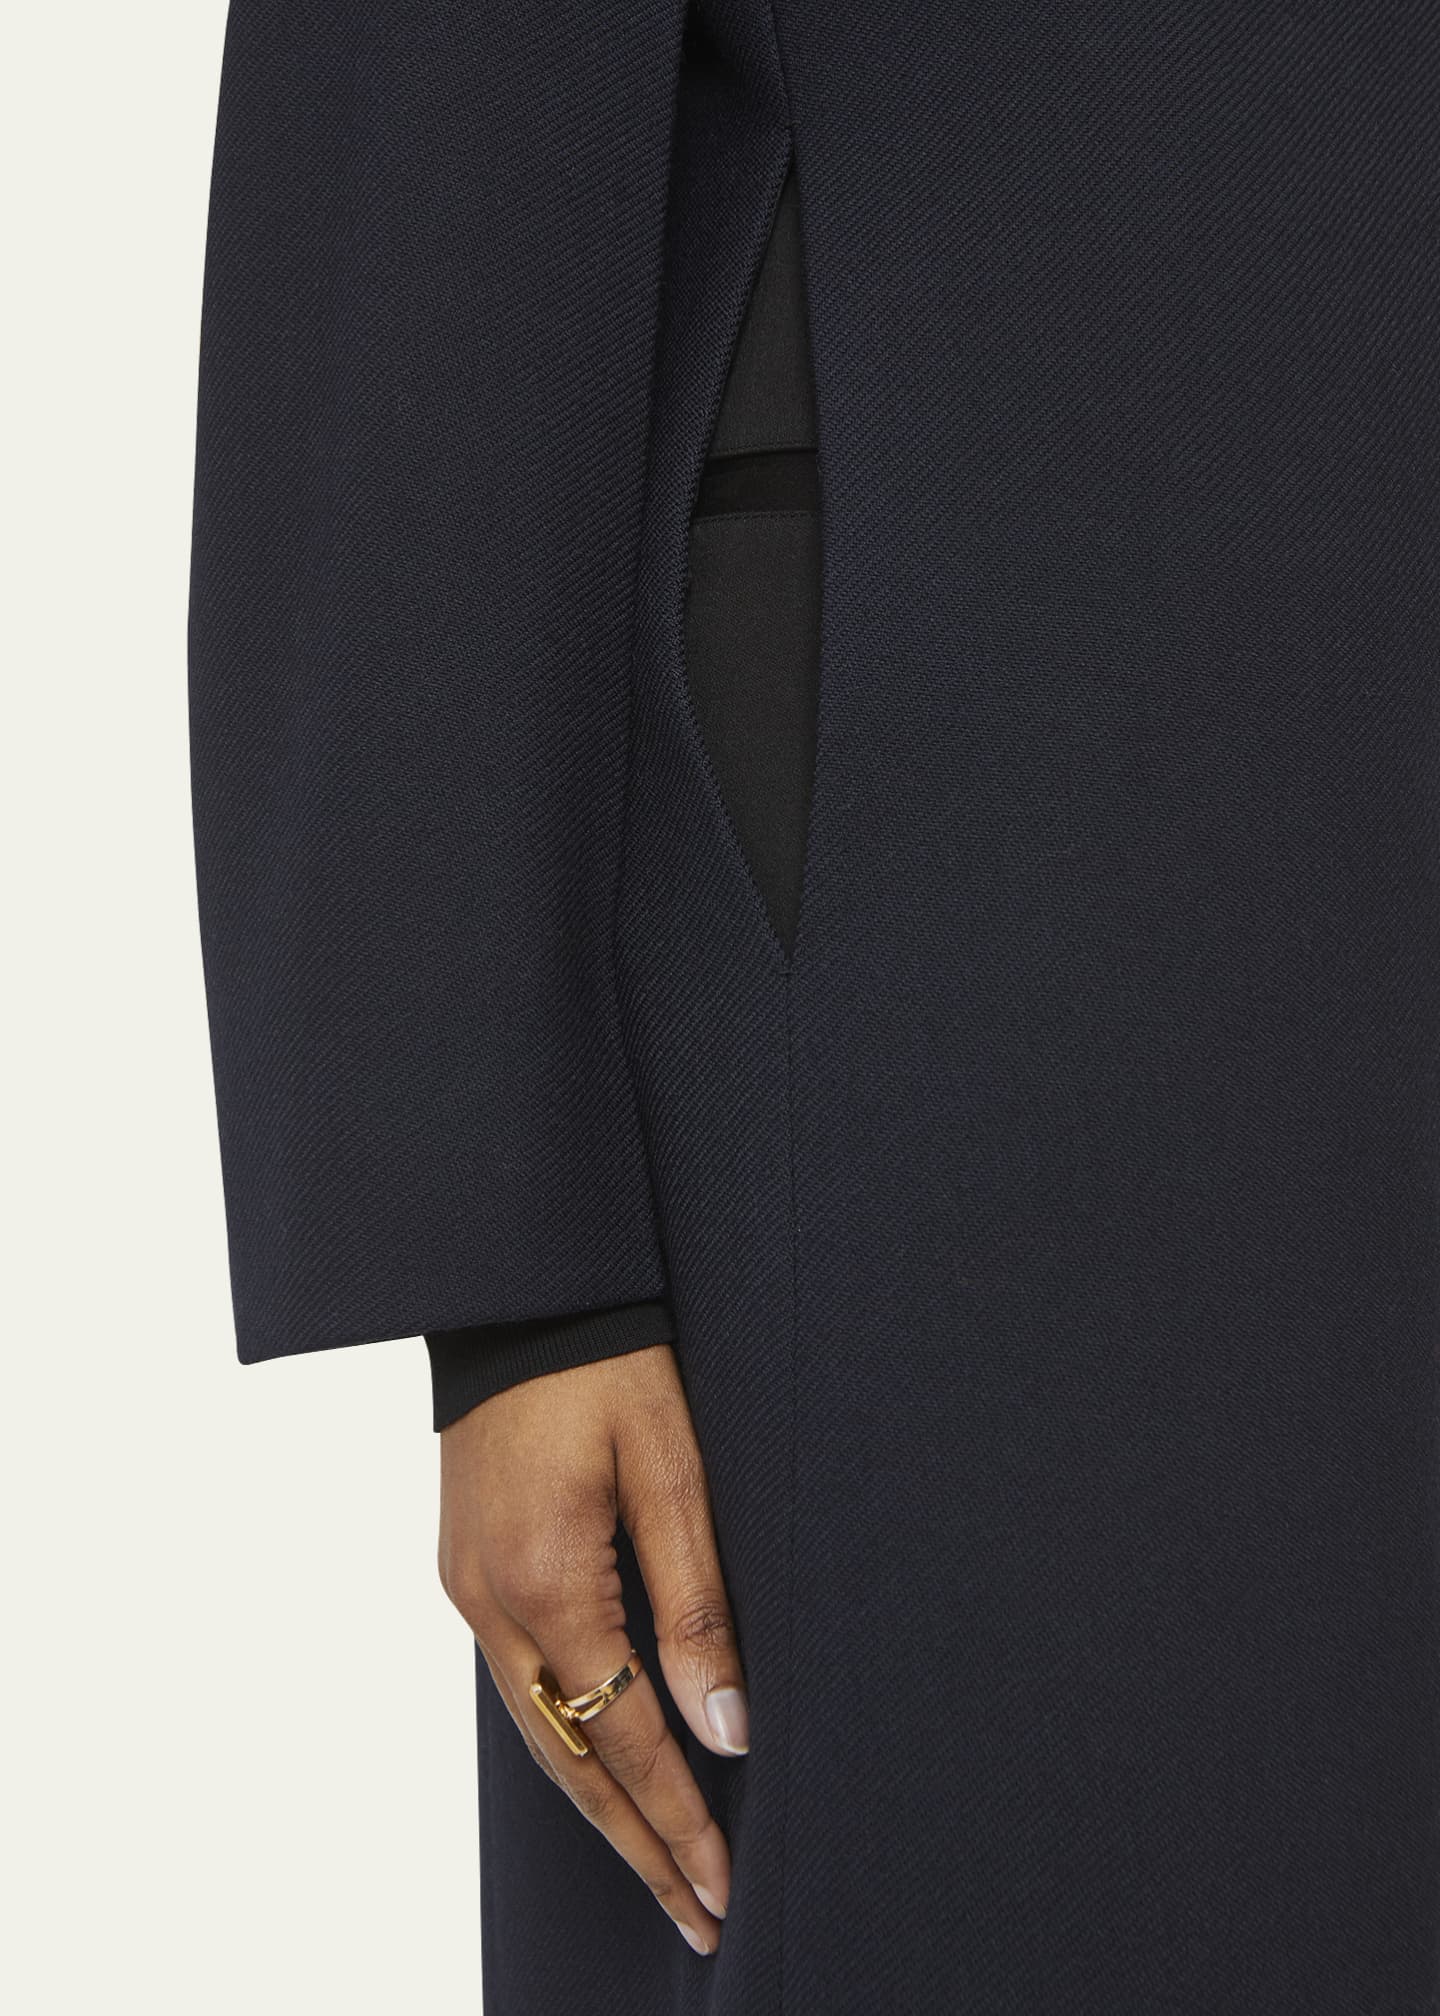 Quira Extra Long Double-Breasted Wool Overcoat